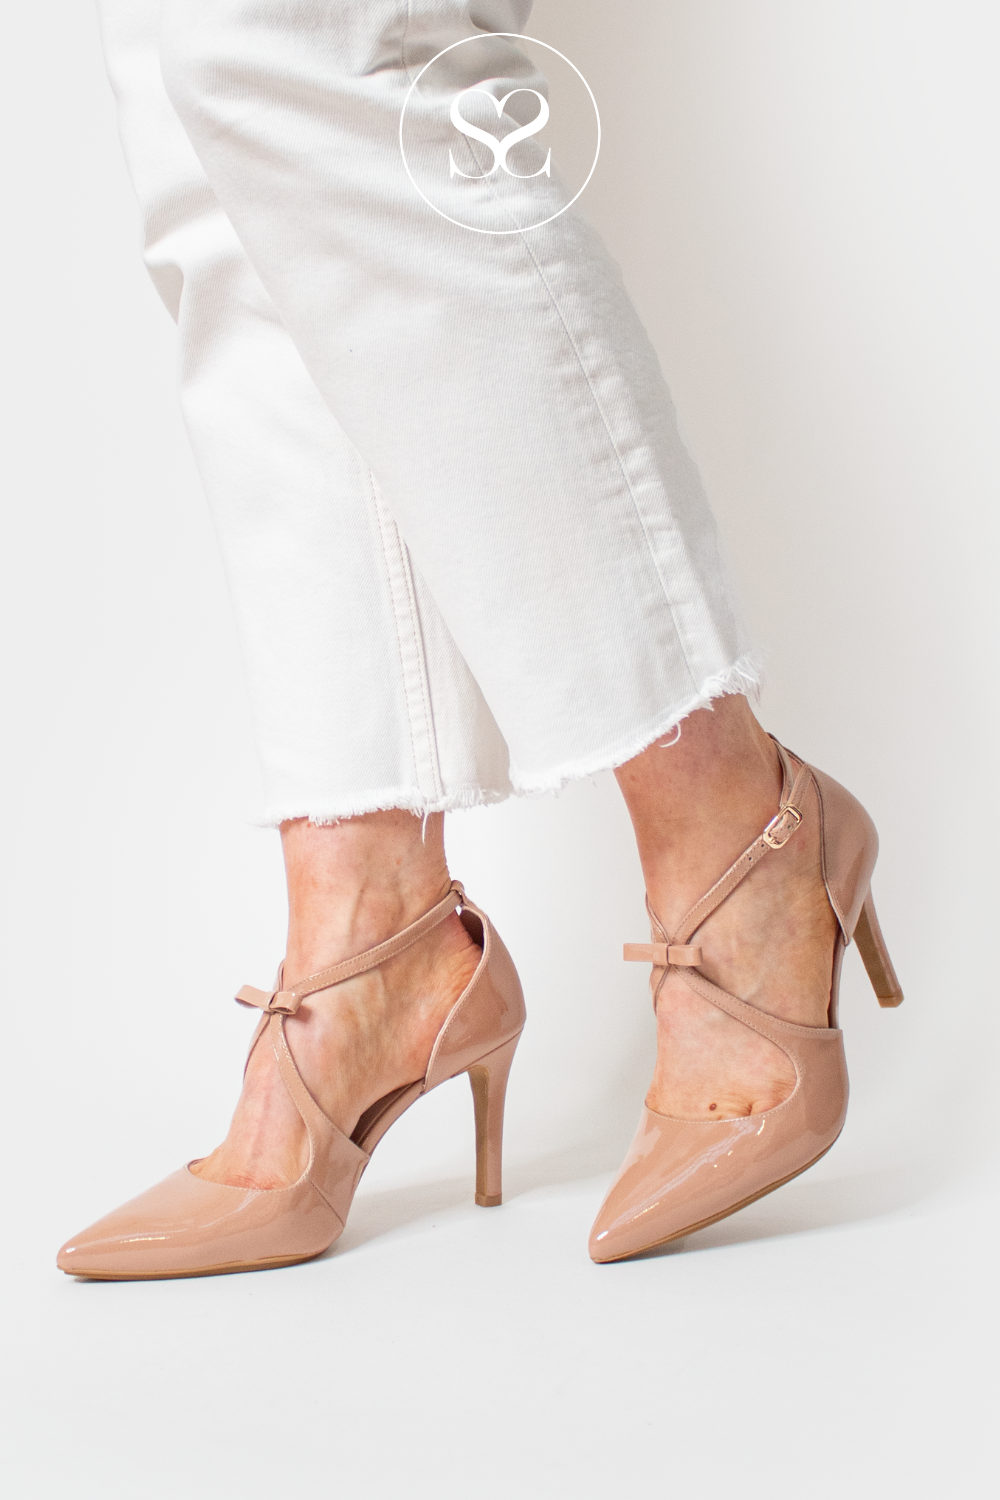 LODI REVECON NUDE PATENT POINTED TOE HIGH HEEL STILETTO WITH V-CUT CRISS CROSS STRAPS WITH BOW